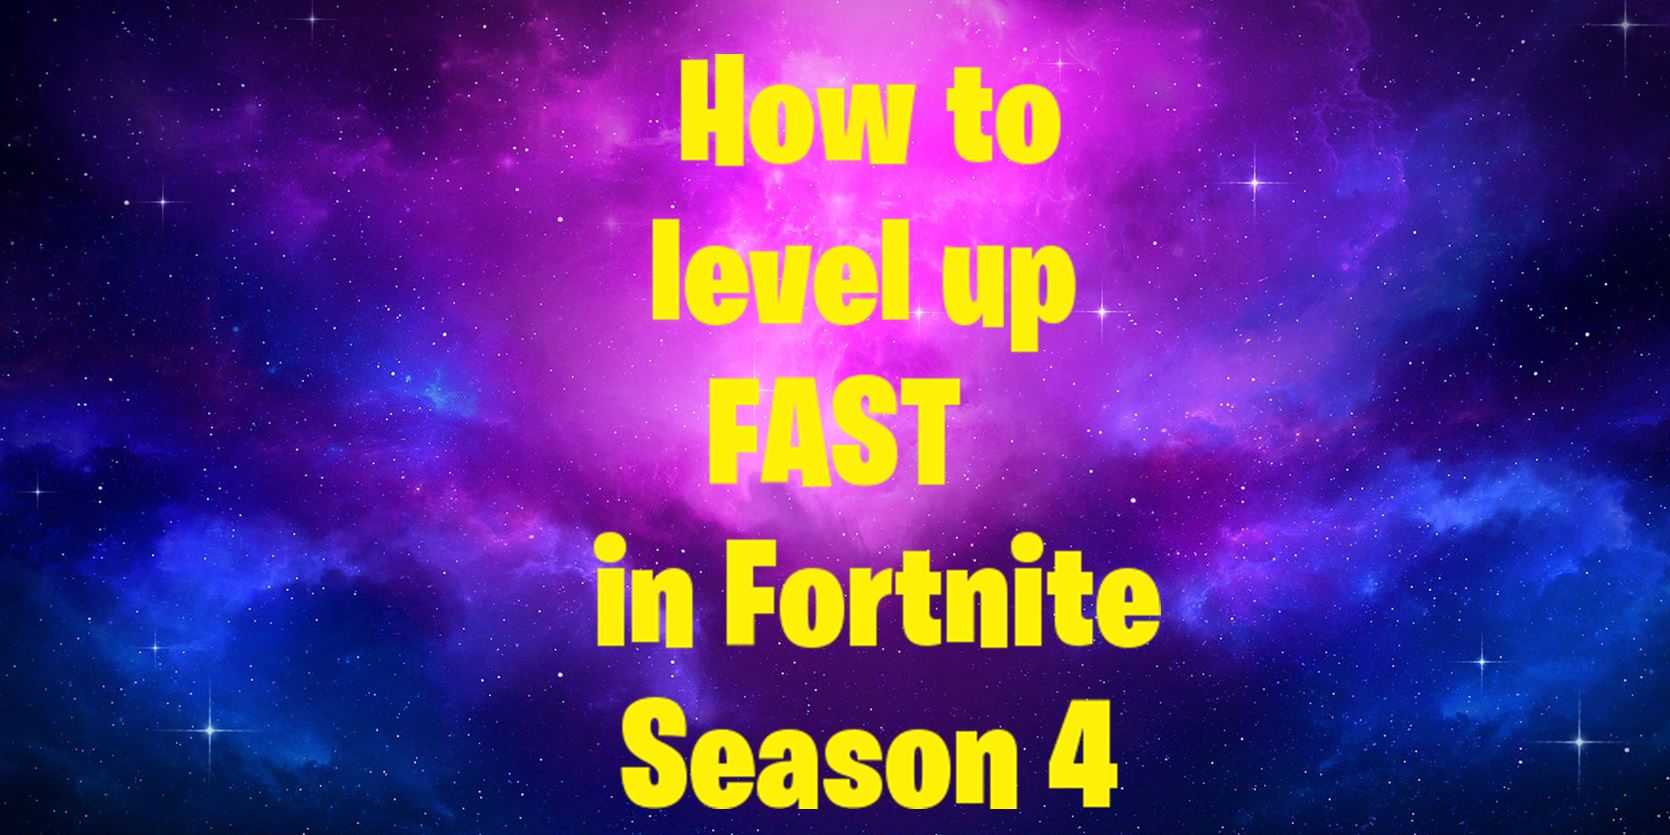 How to level up fast in Fortnite Season 4